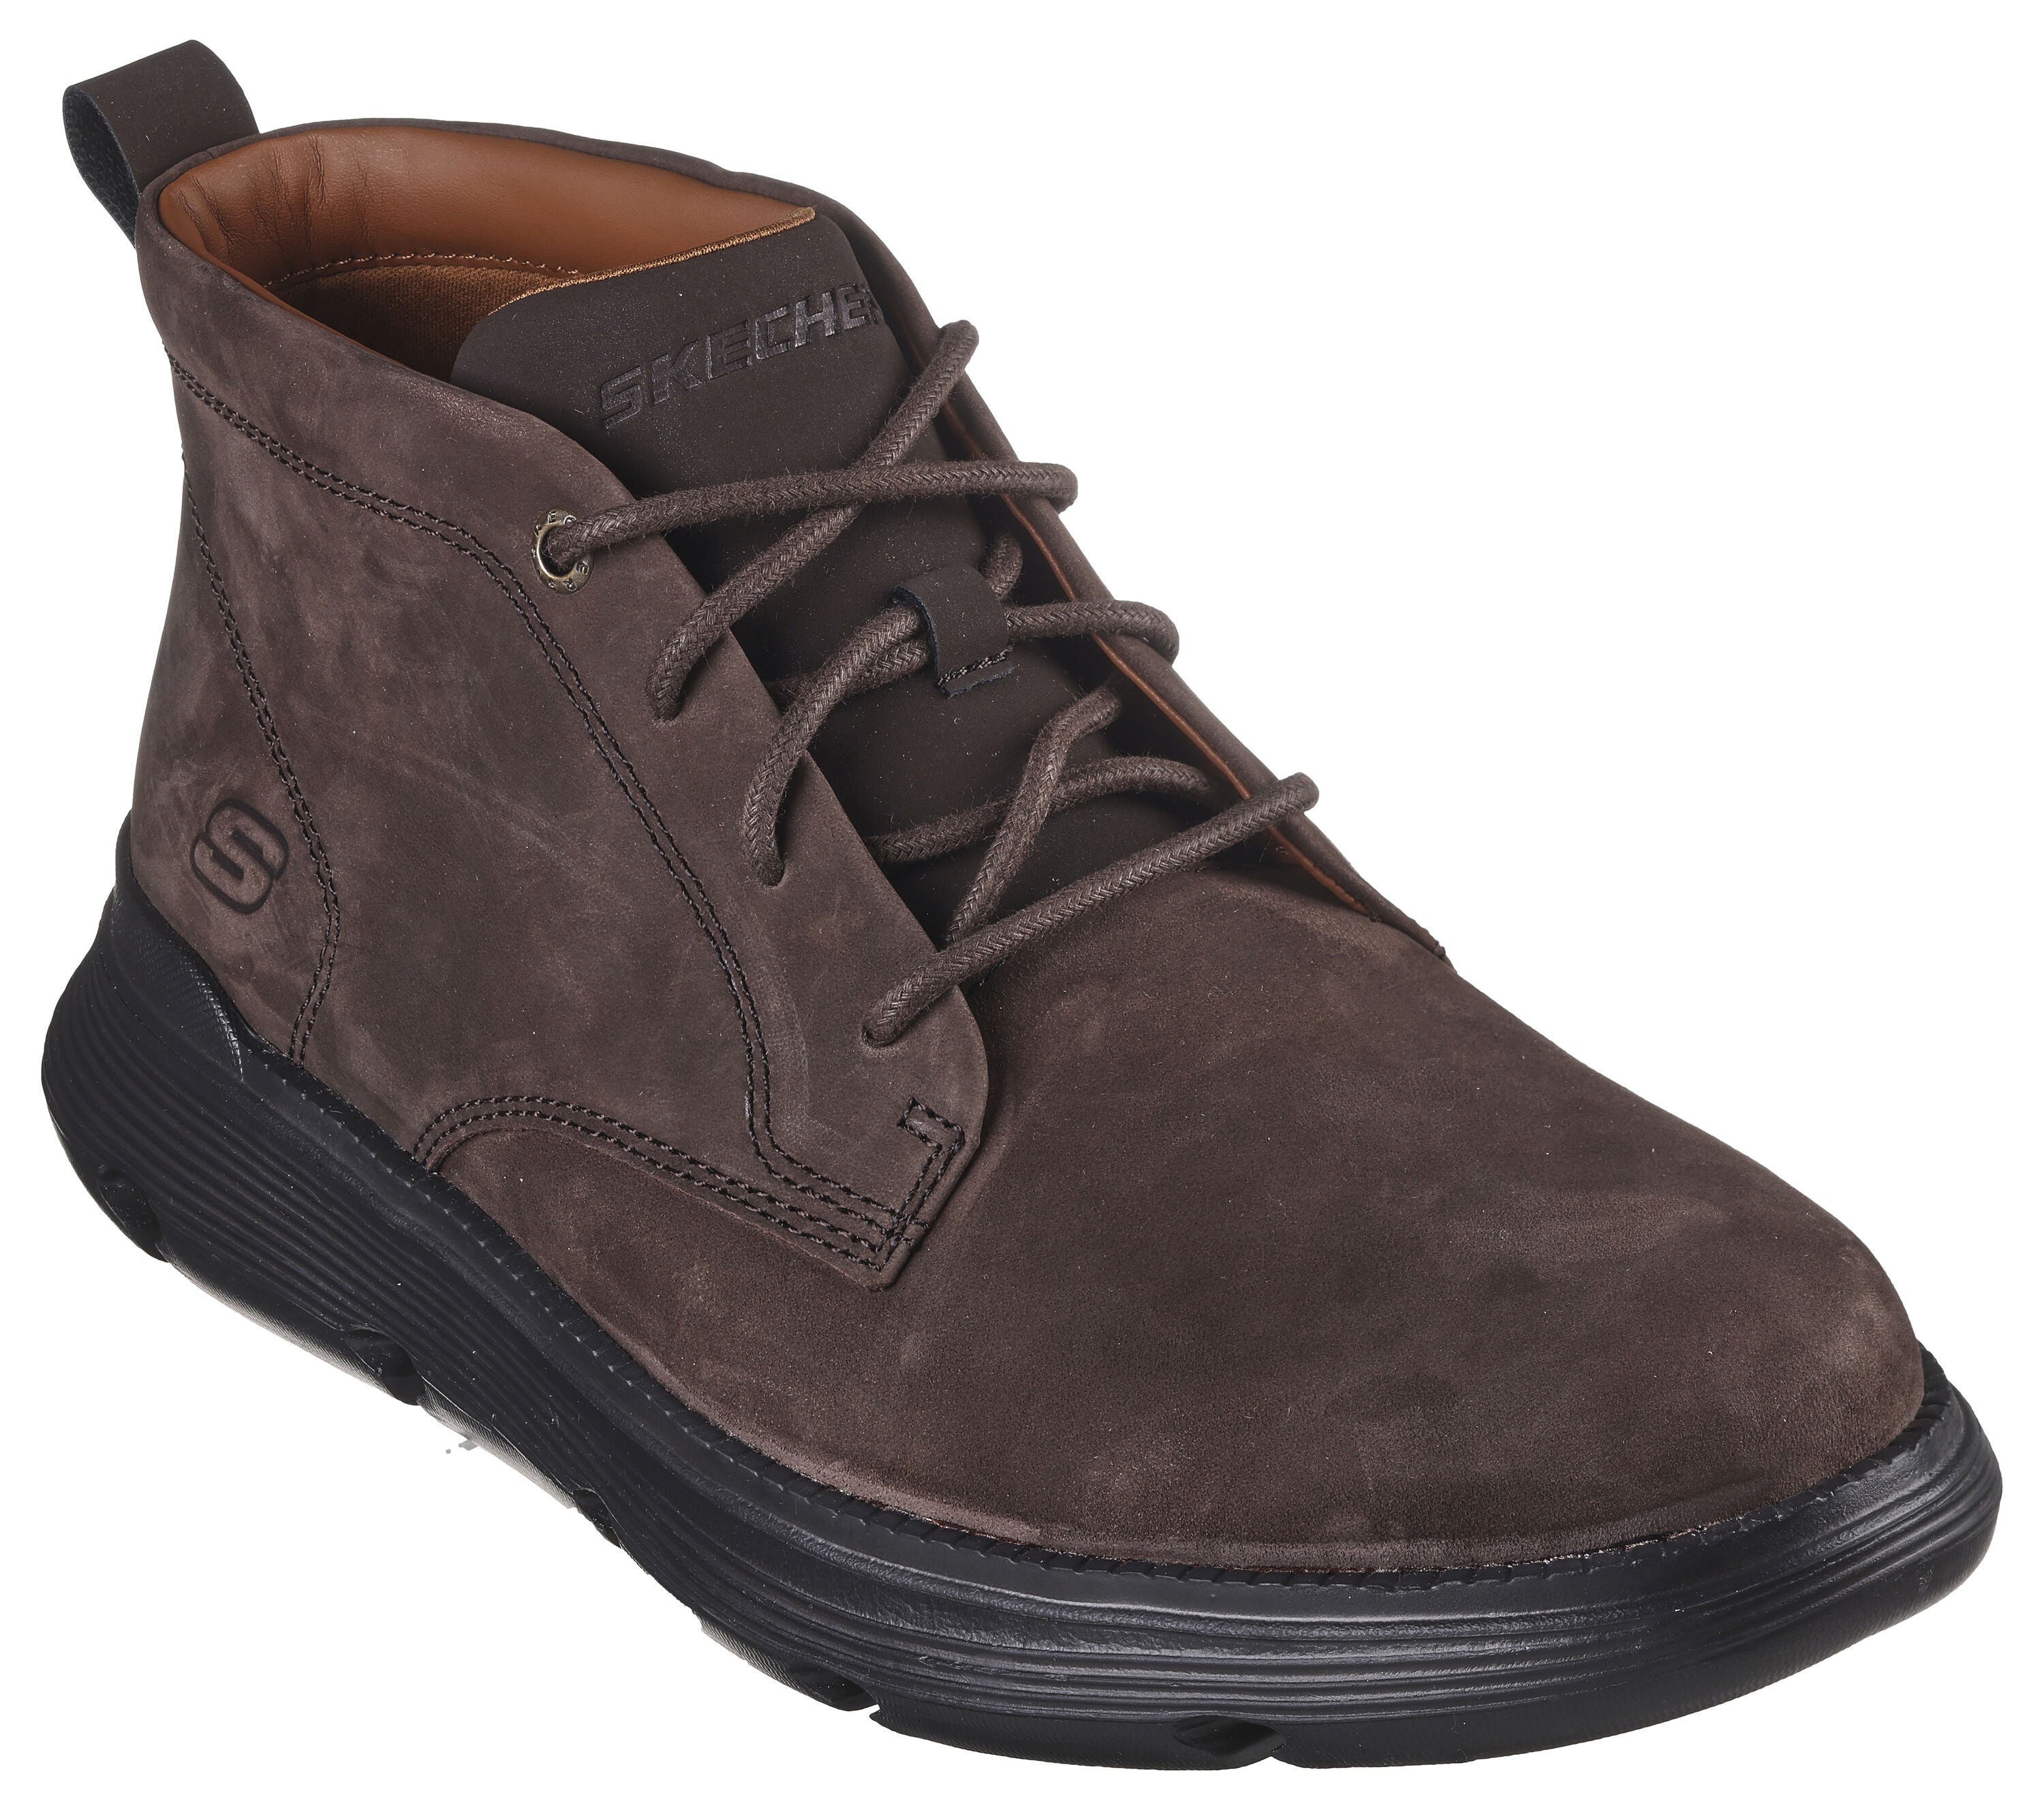 Skechers 204903 Garza Fontaine Mens Chocolate Leather Lace Up Ankle Boots